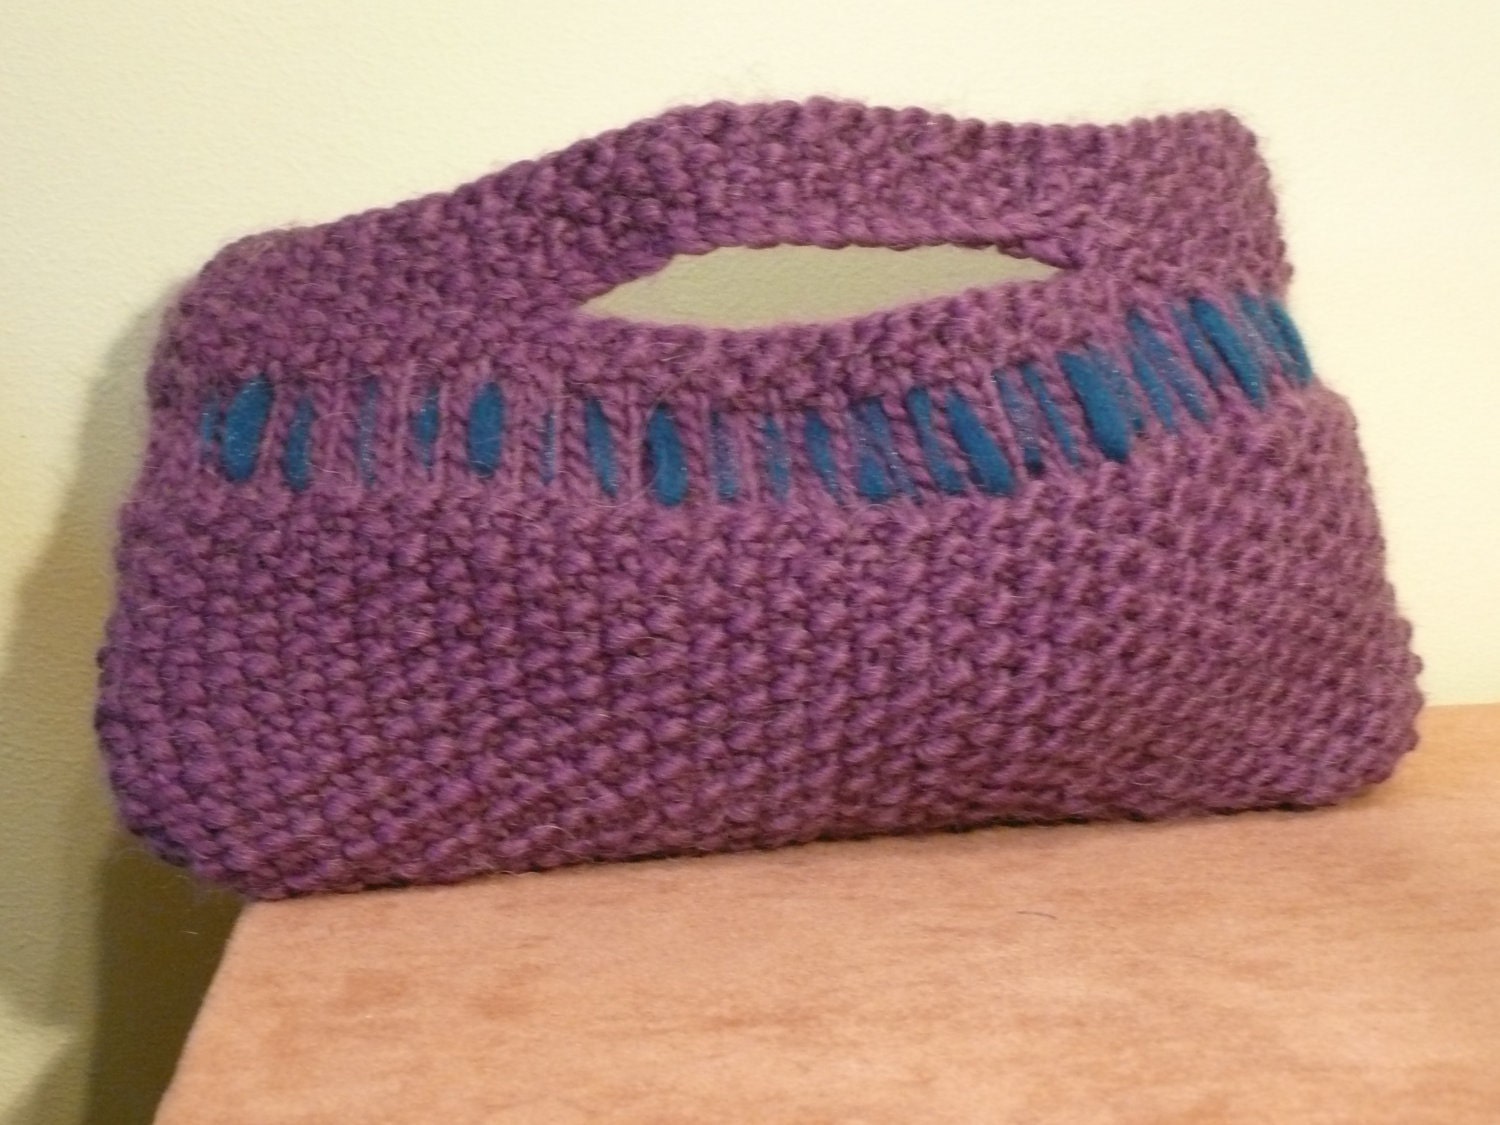 Knitted Clutch Bag